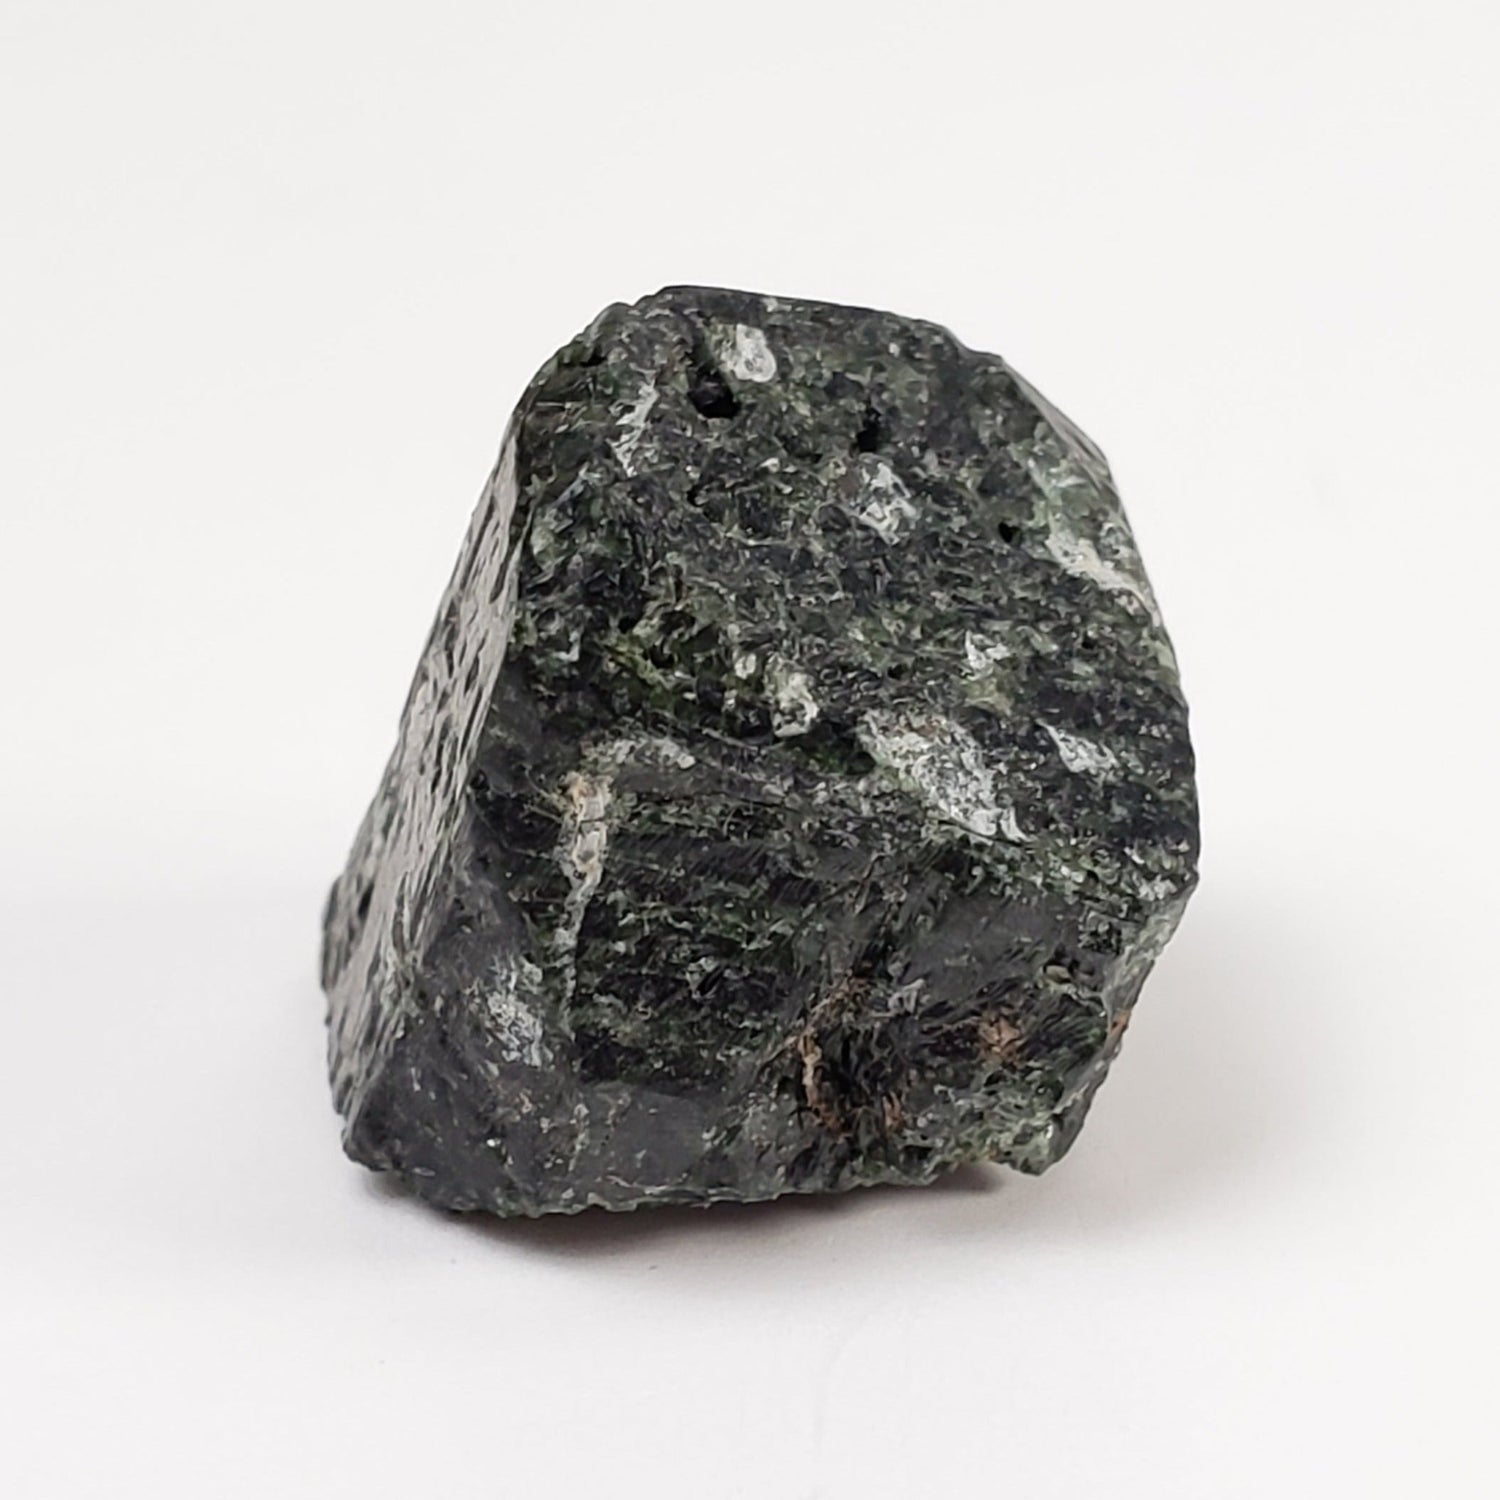 Diopside Crystal | 6.18 grams | 5 Sided Terminated Crystal | Otter Lake, QC, Canada